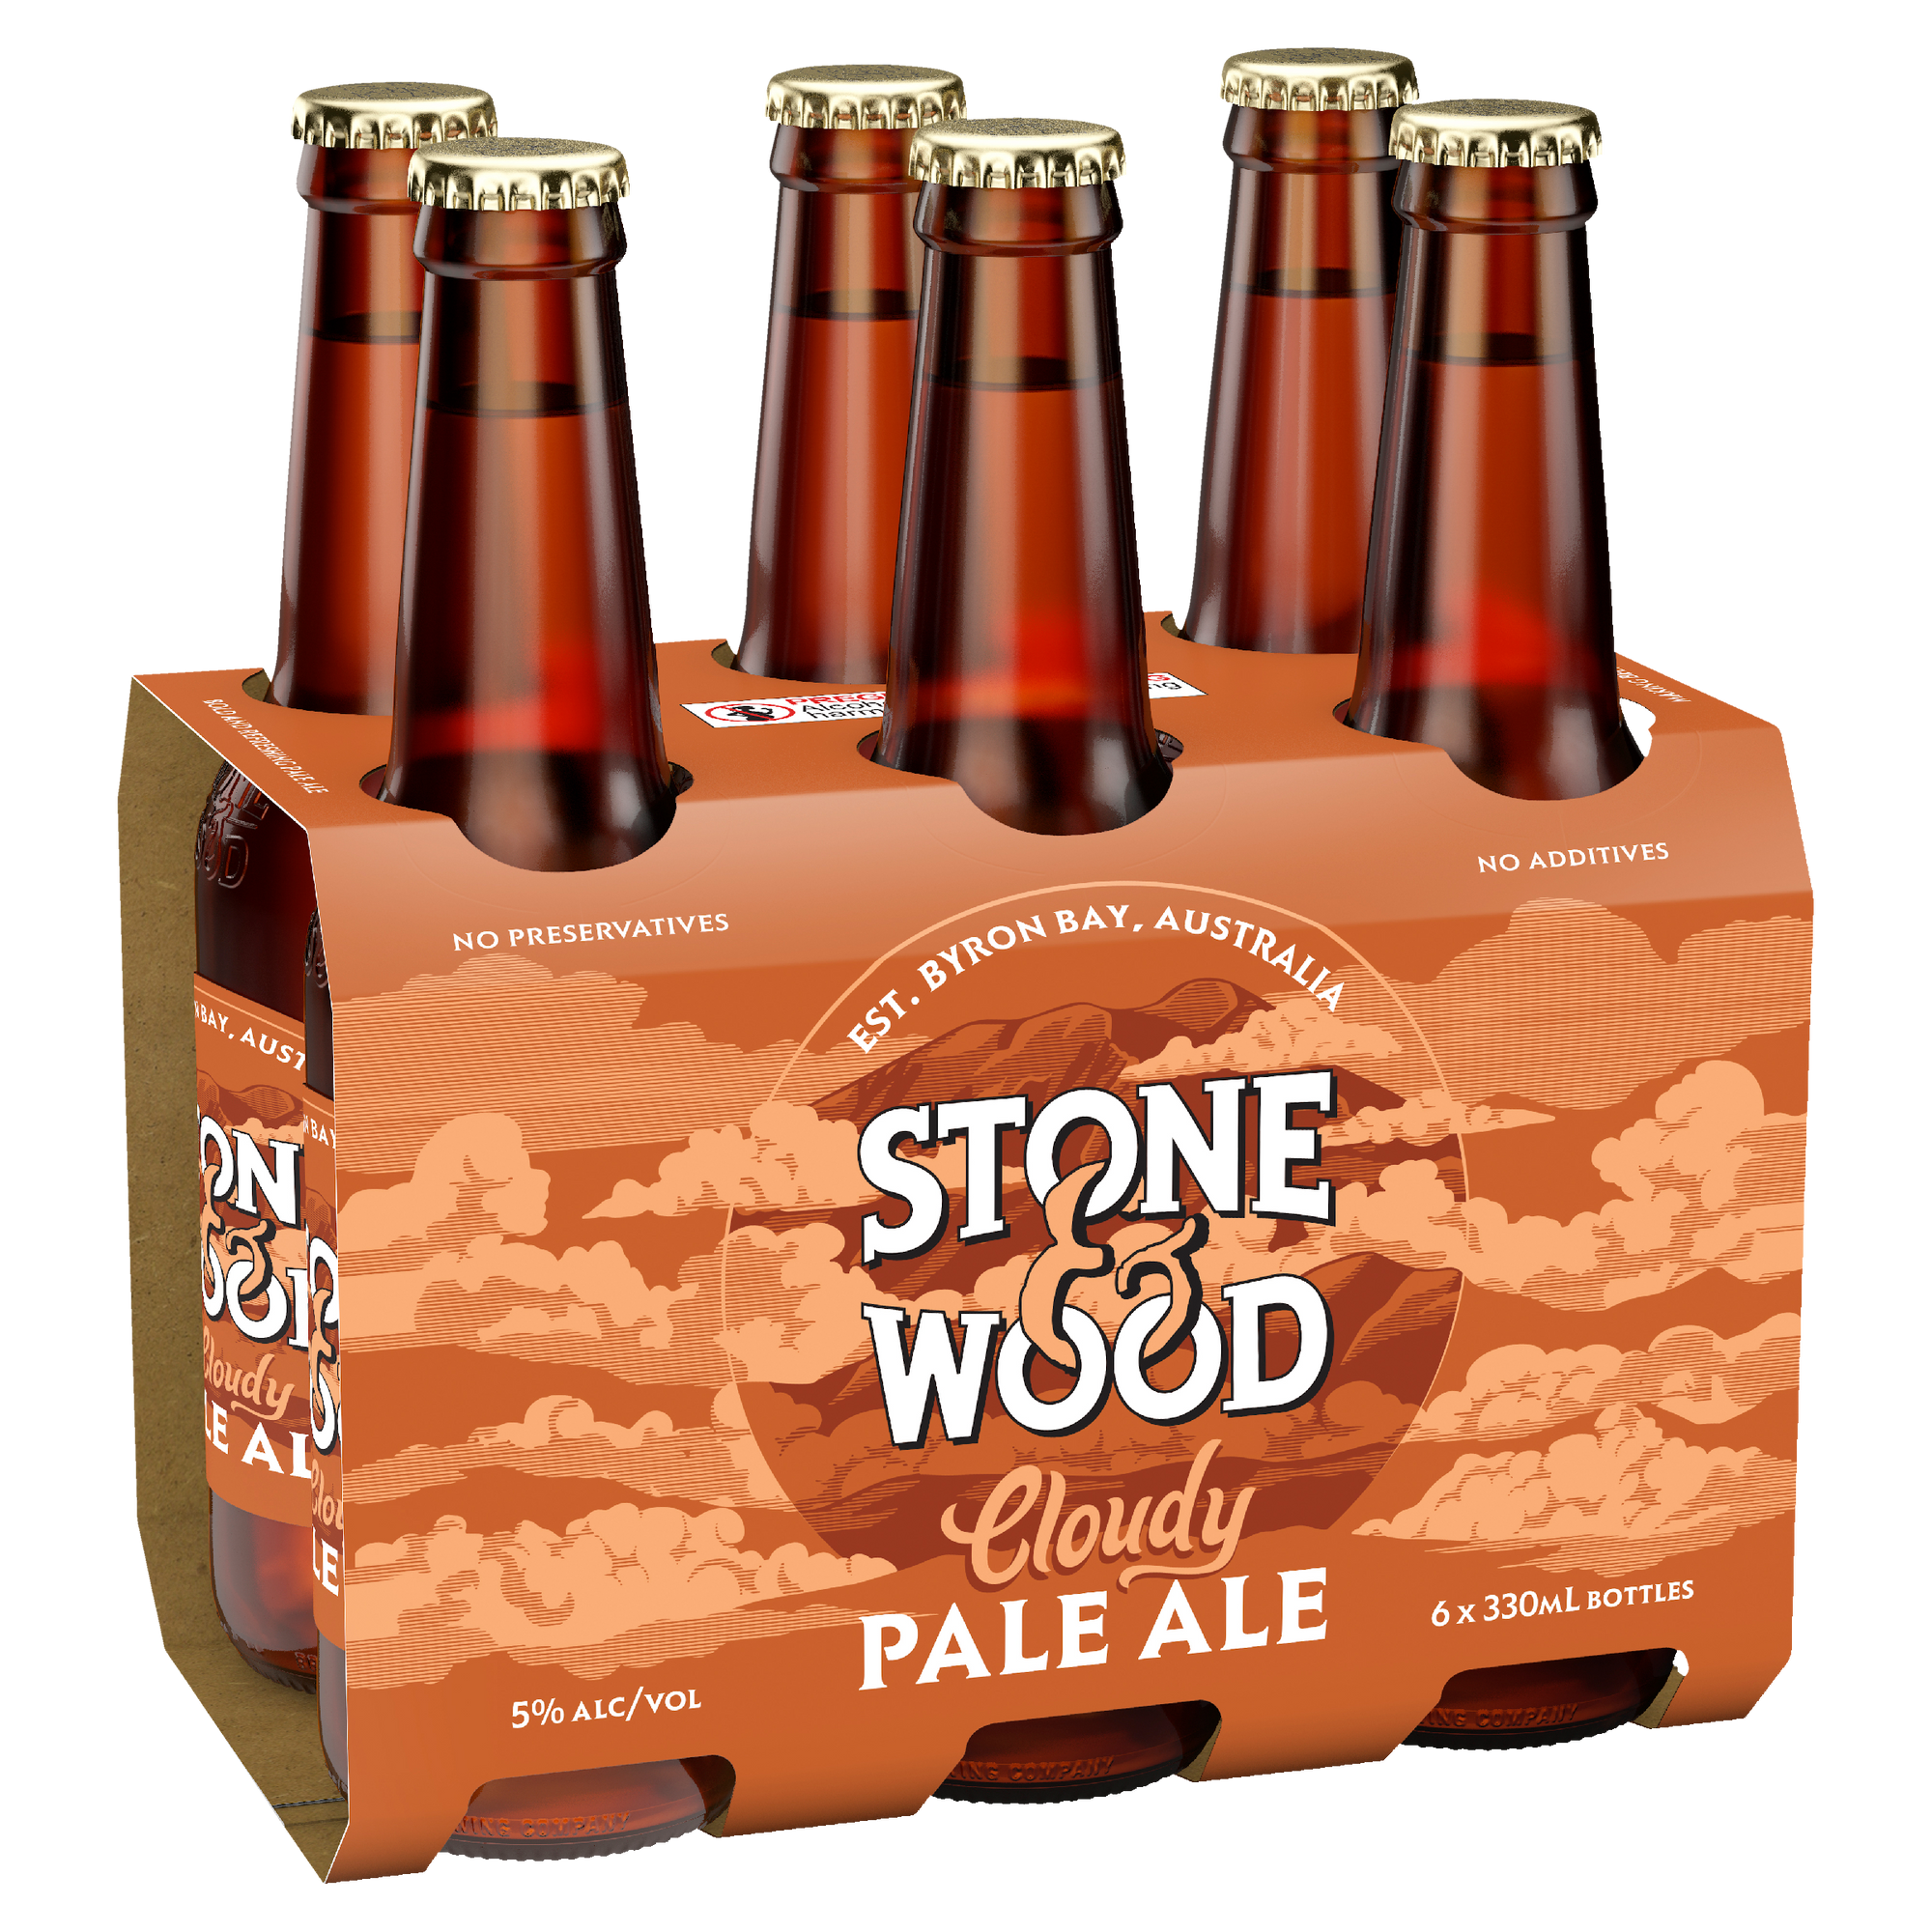 Stone & Wood Cloudy Pale Ale 330ml Bottle 6 Pack